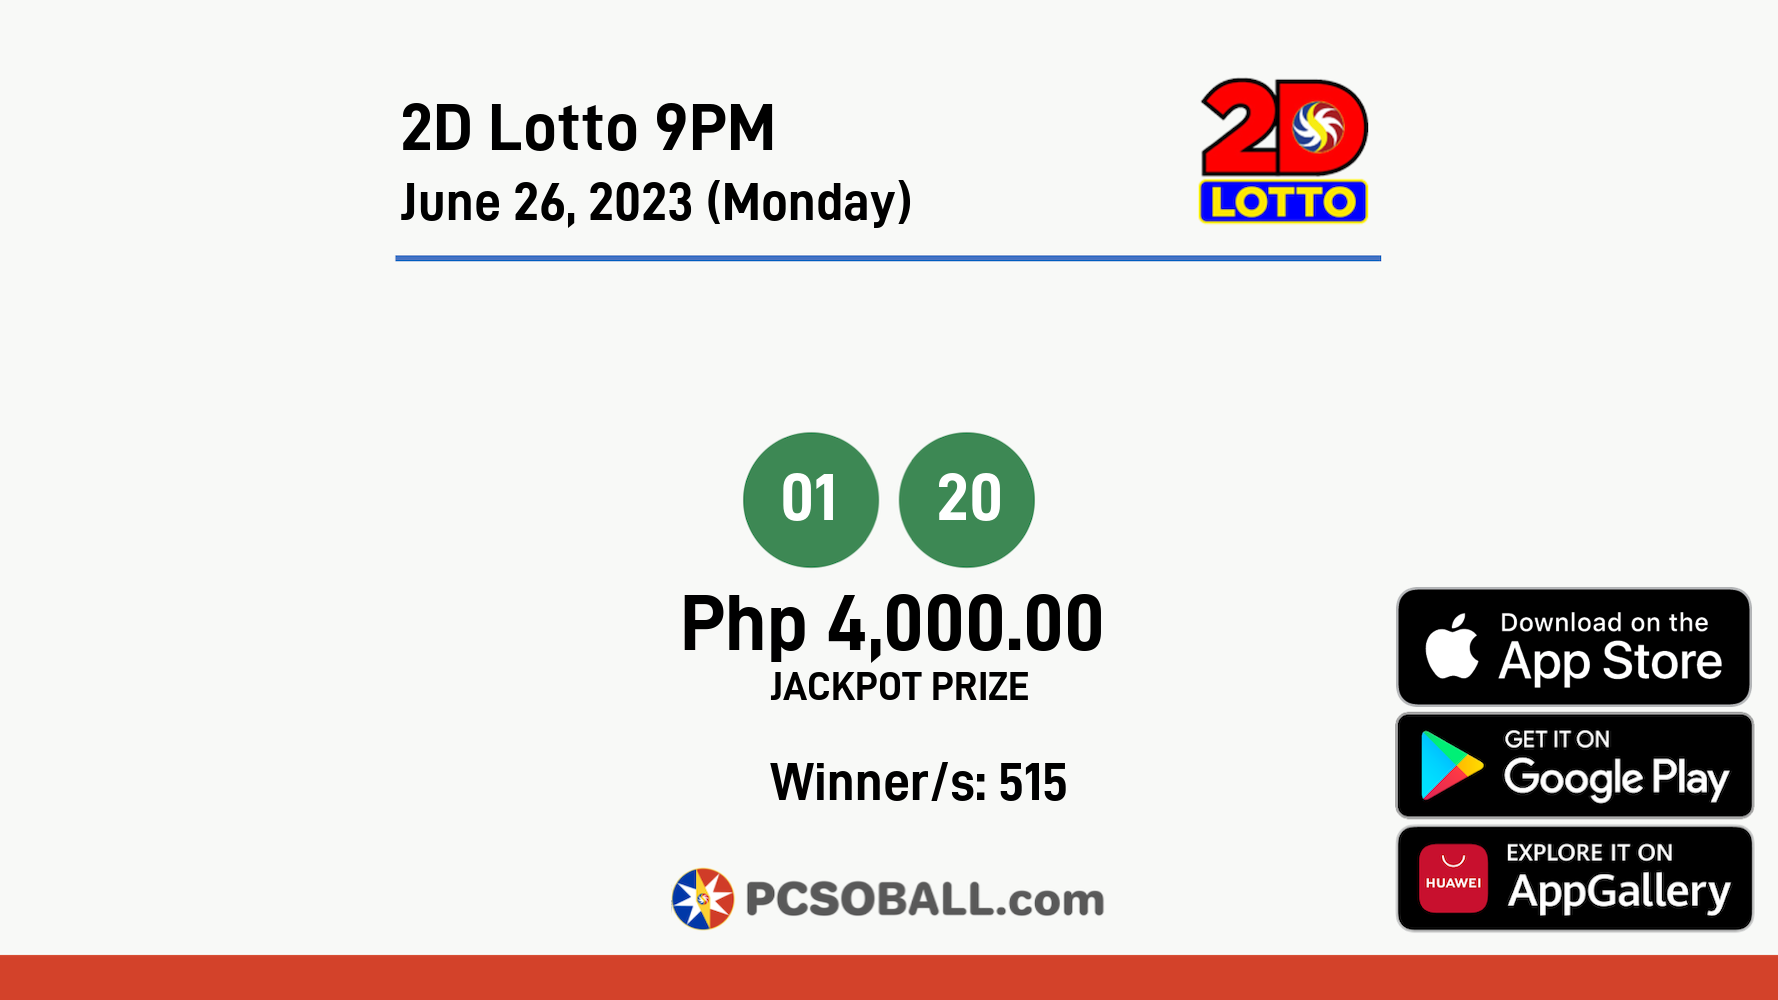 2D Lotto 9PM June 26, 2023 (Monday) Result